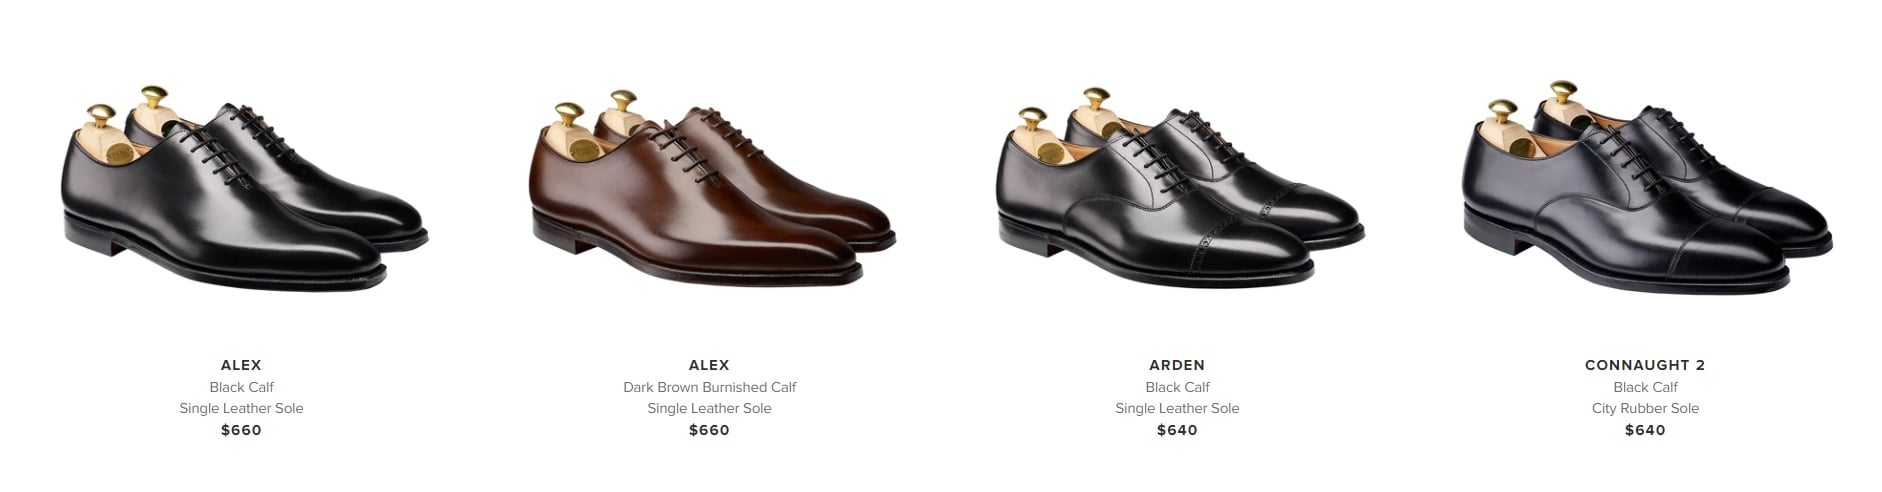 Why Are Wholecut Oxfords More Expensive?